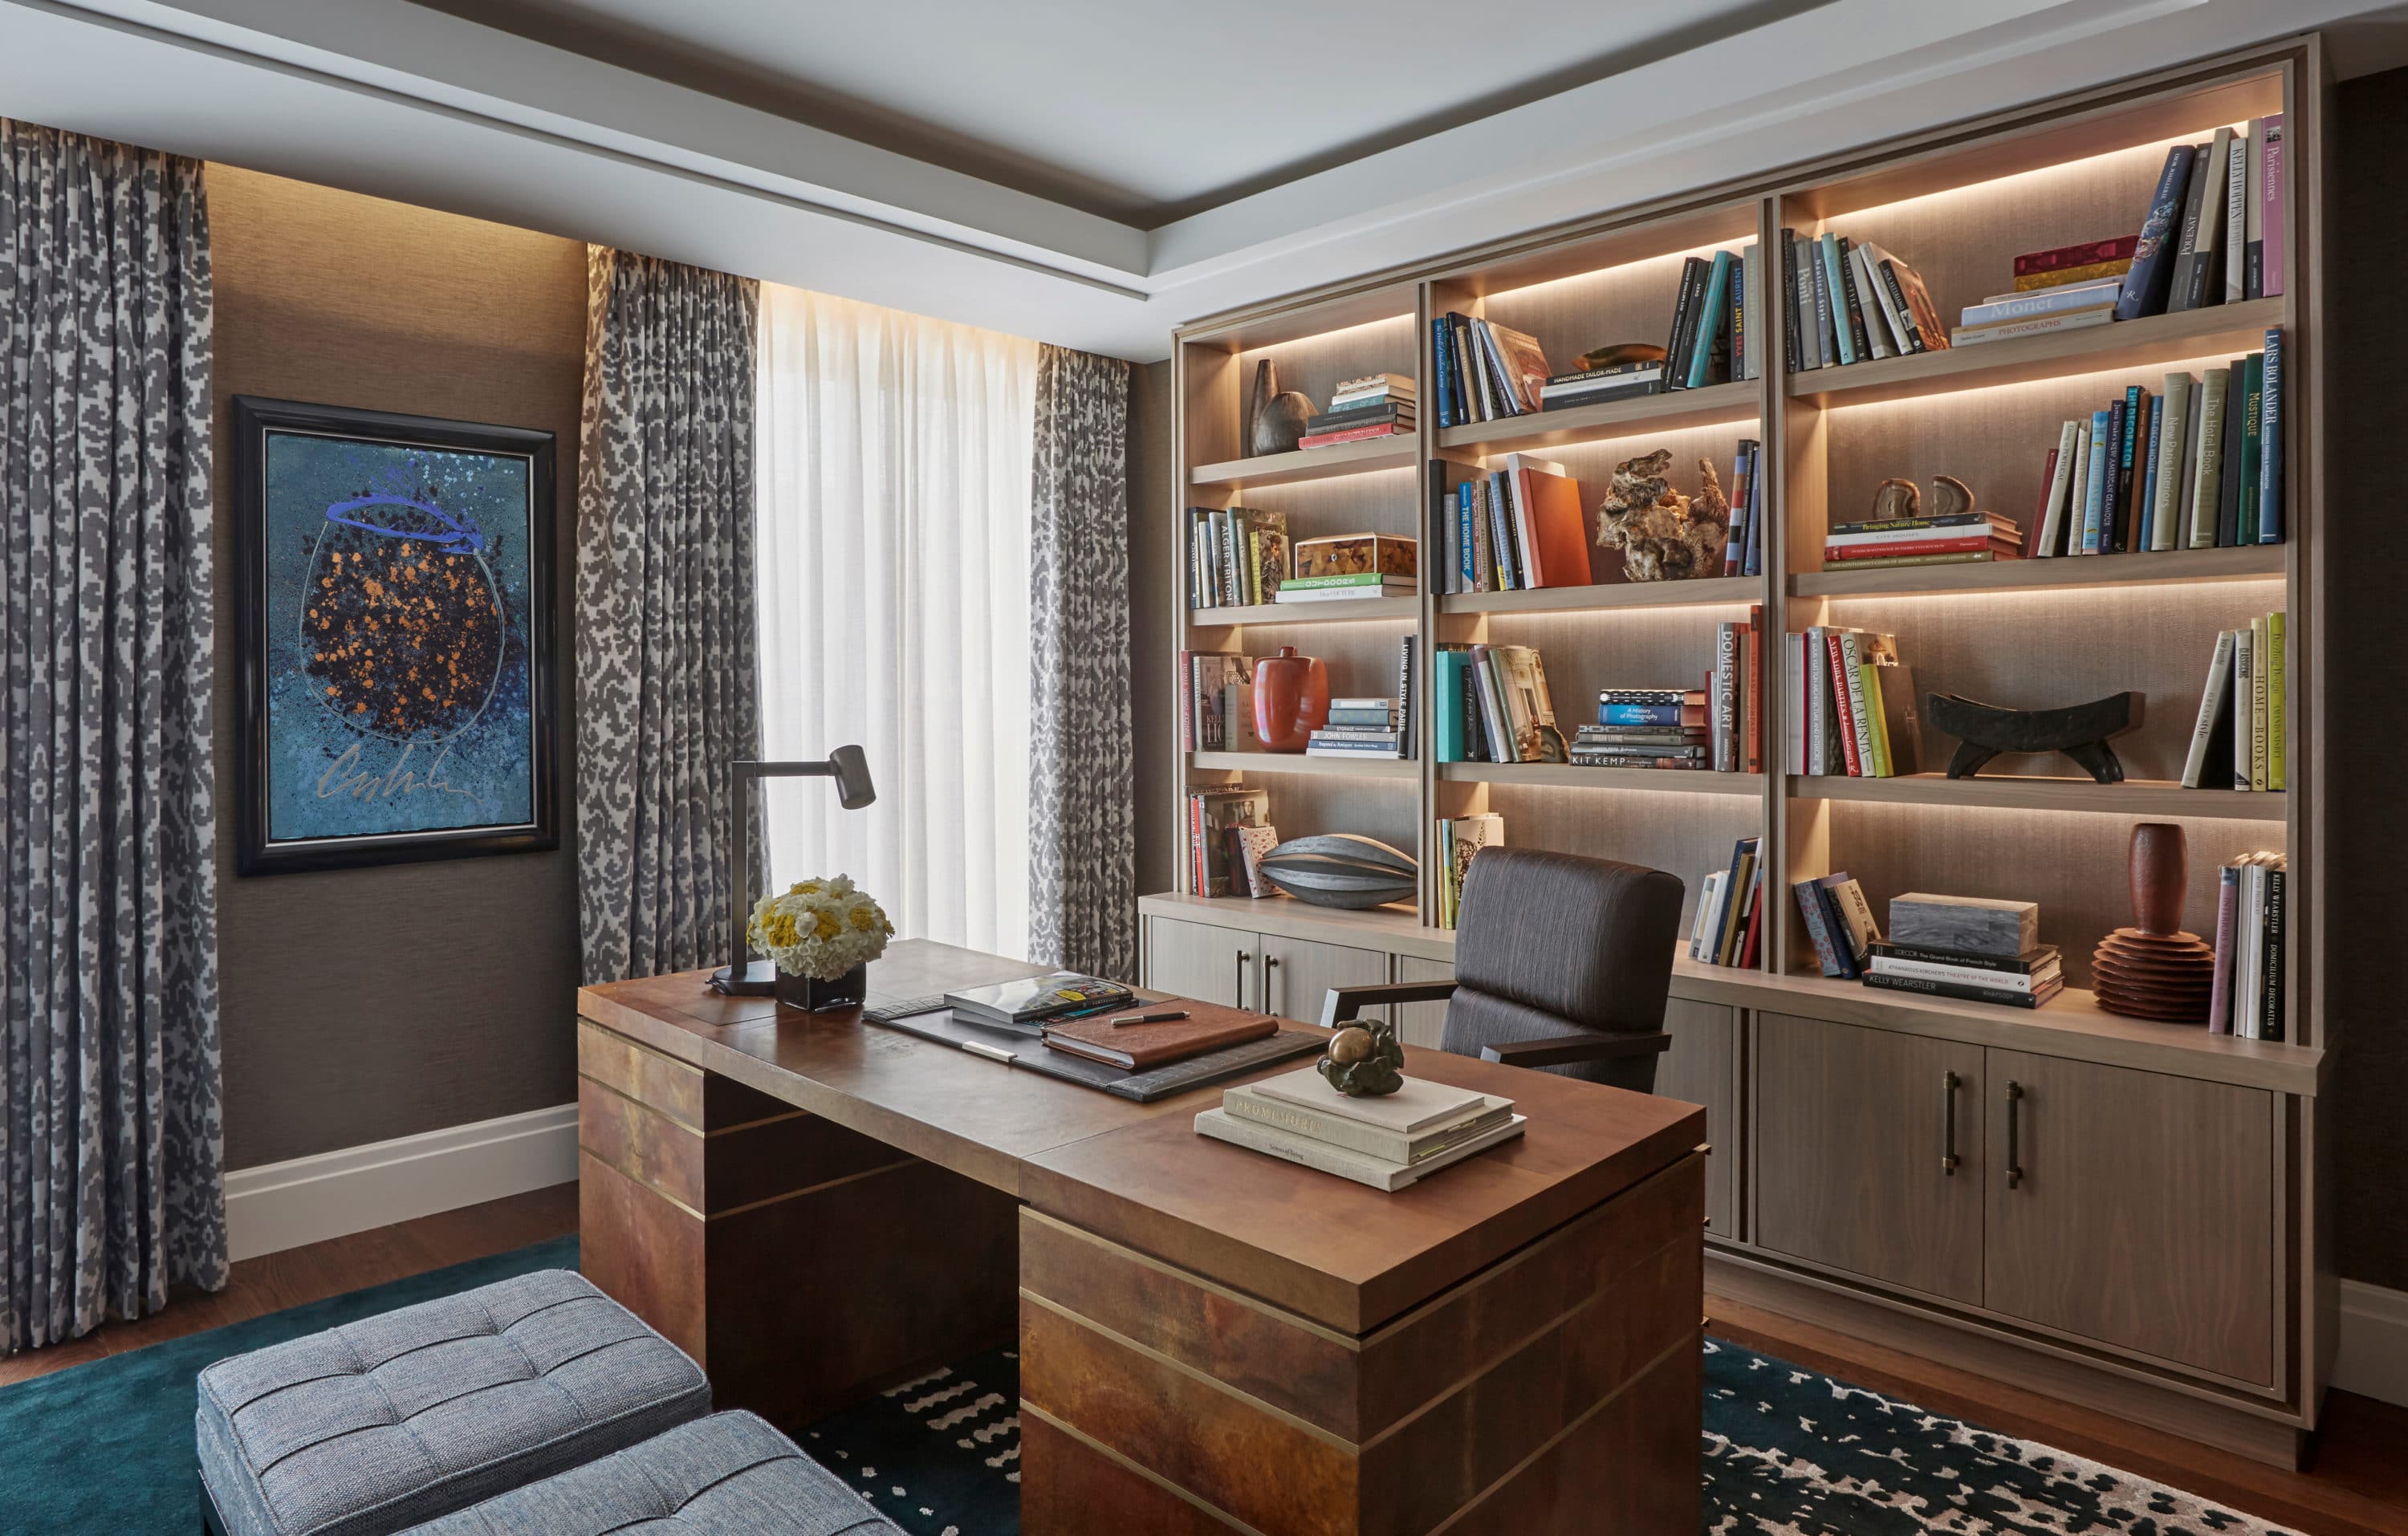 How To Design A Home Office That Boosts Productivity